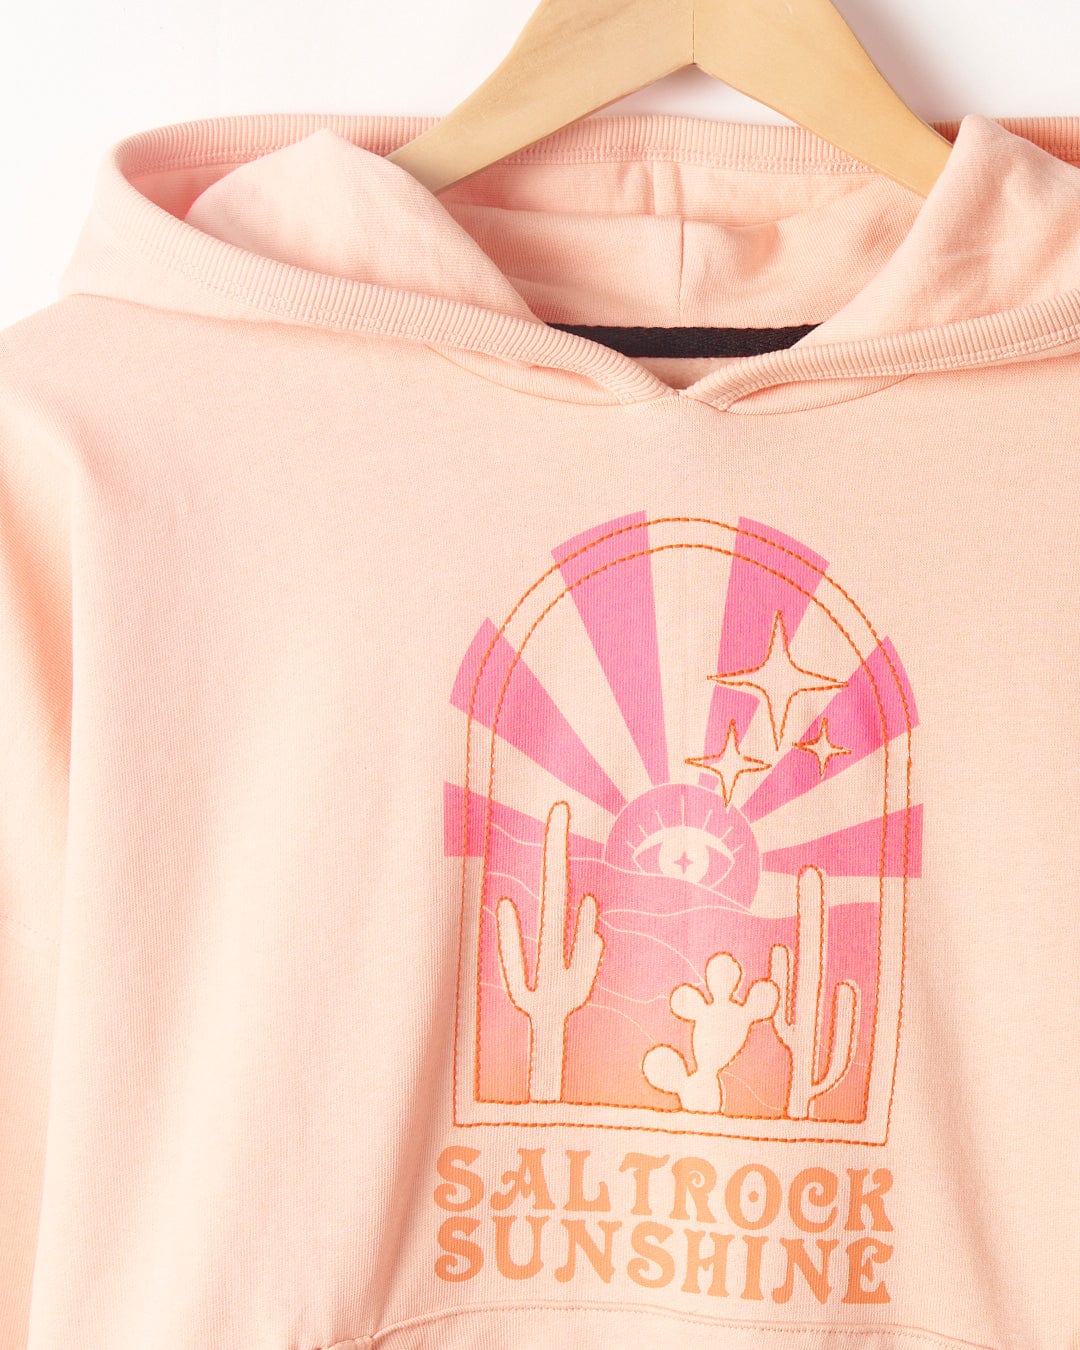 Saltrock Sunshine - Womens Pop Hood - Peach on hanger with a mystical ombre print showcasing cacti, sun rays, and stars inside an arch, captioned "Saltrock".